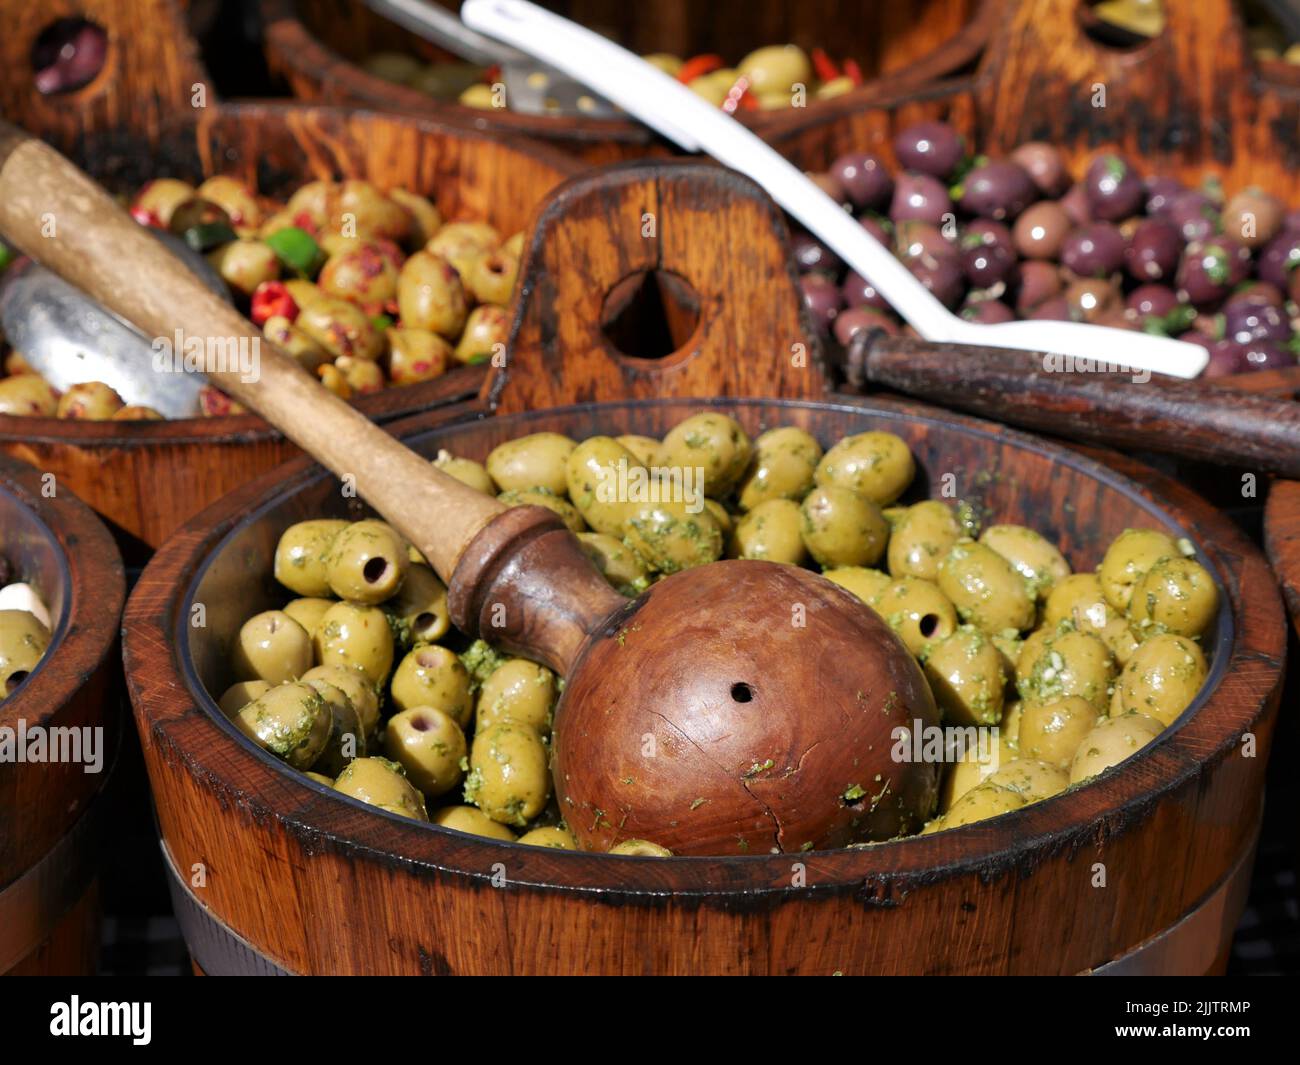 Bowls of olives for sale on a market stall Stock Photo